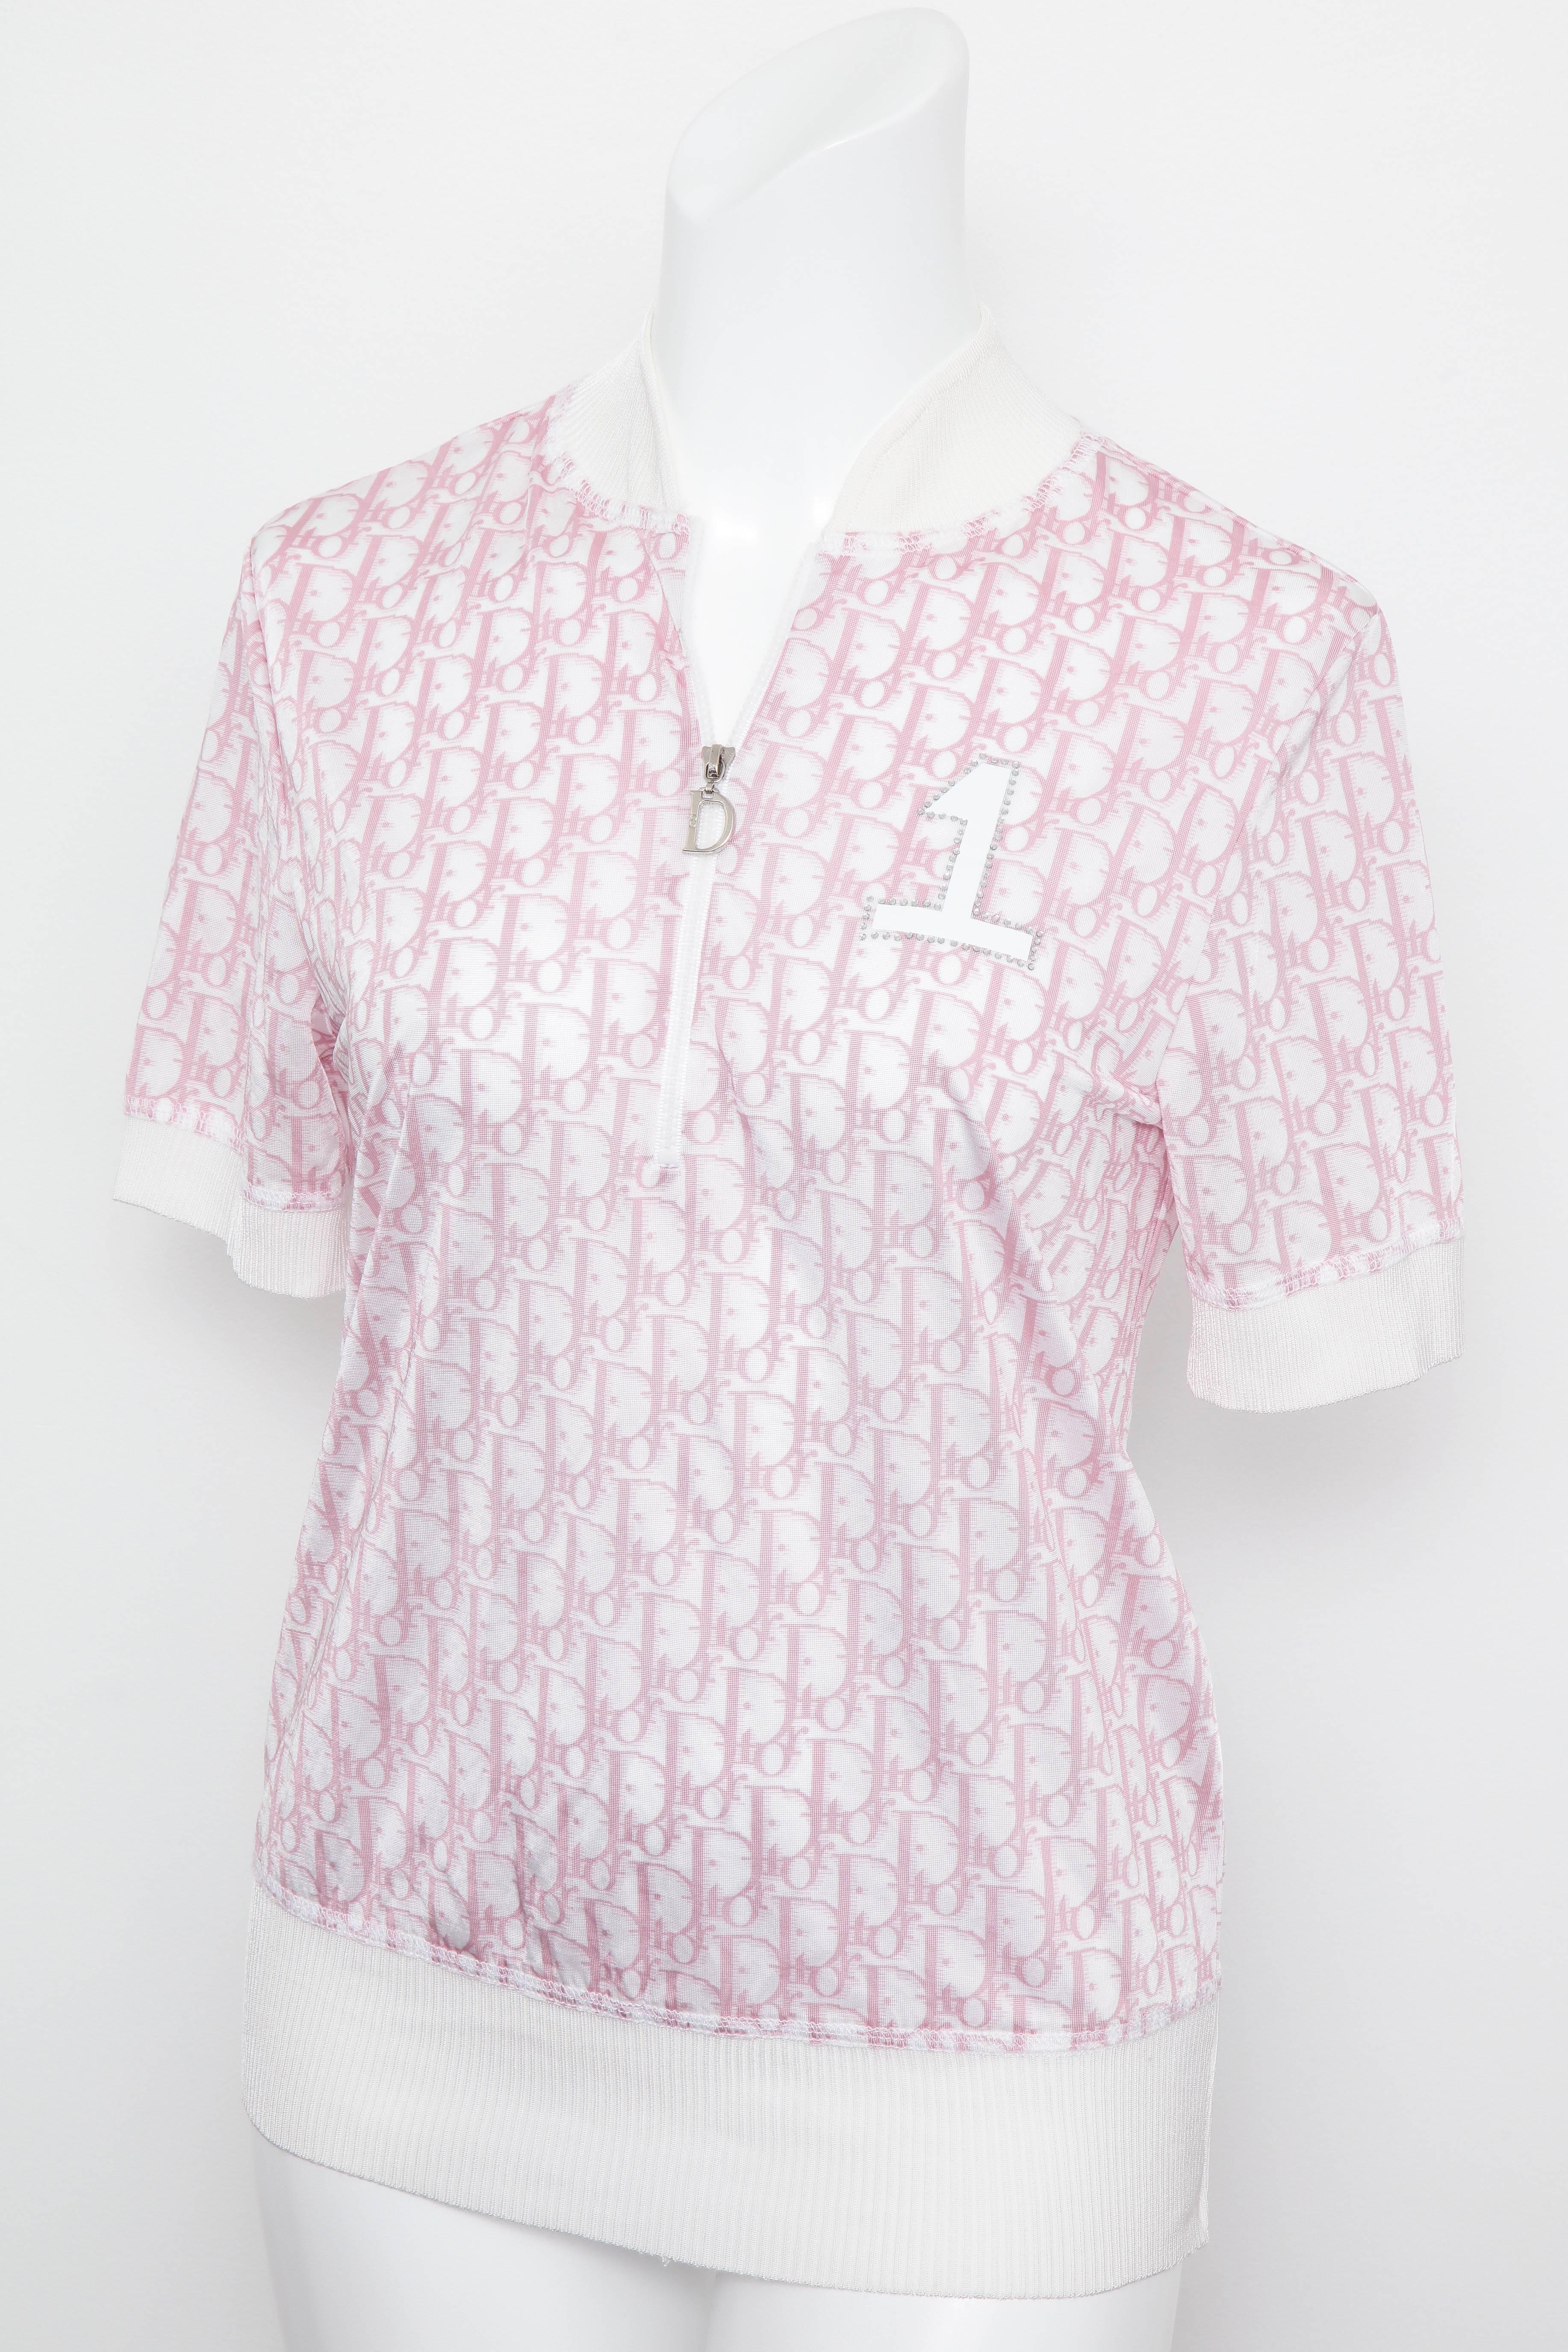 Very rare John Galliano for Christian Dior pink trotter logo shirt with iconic Dior logo print. 

FR Size 40